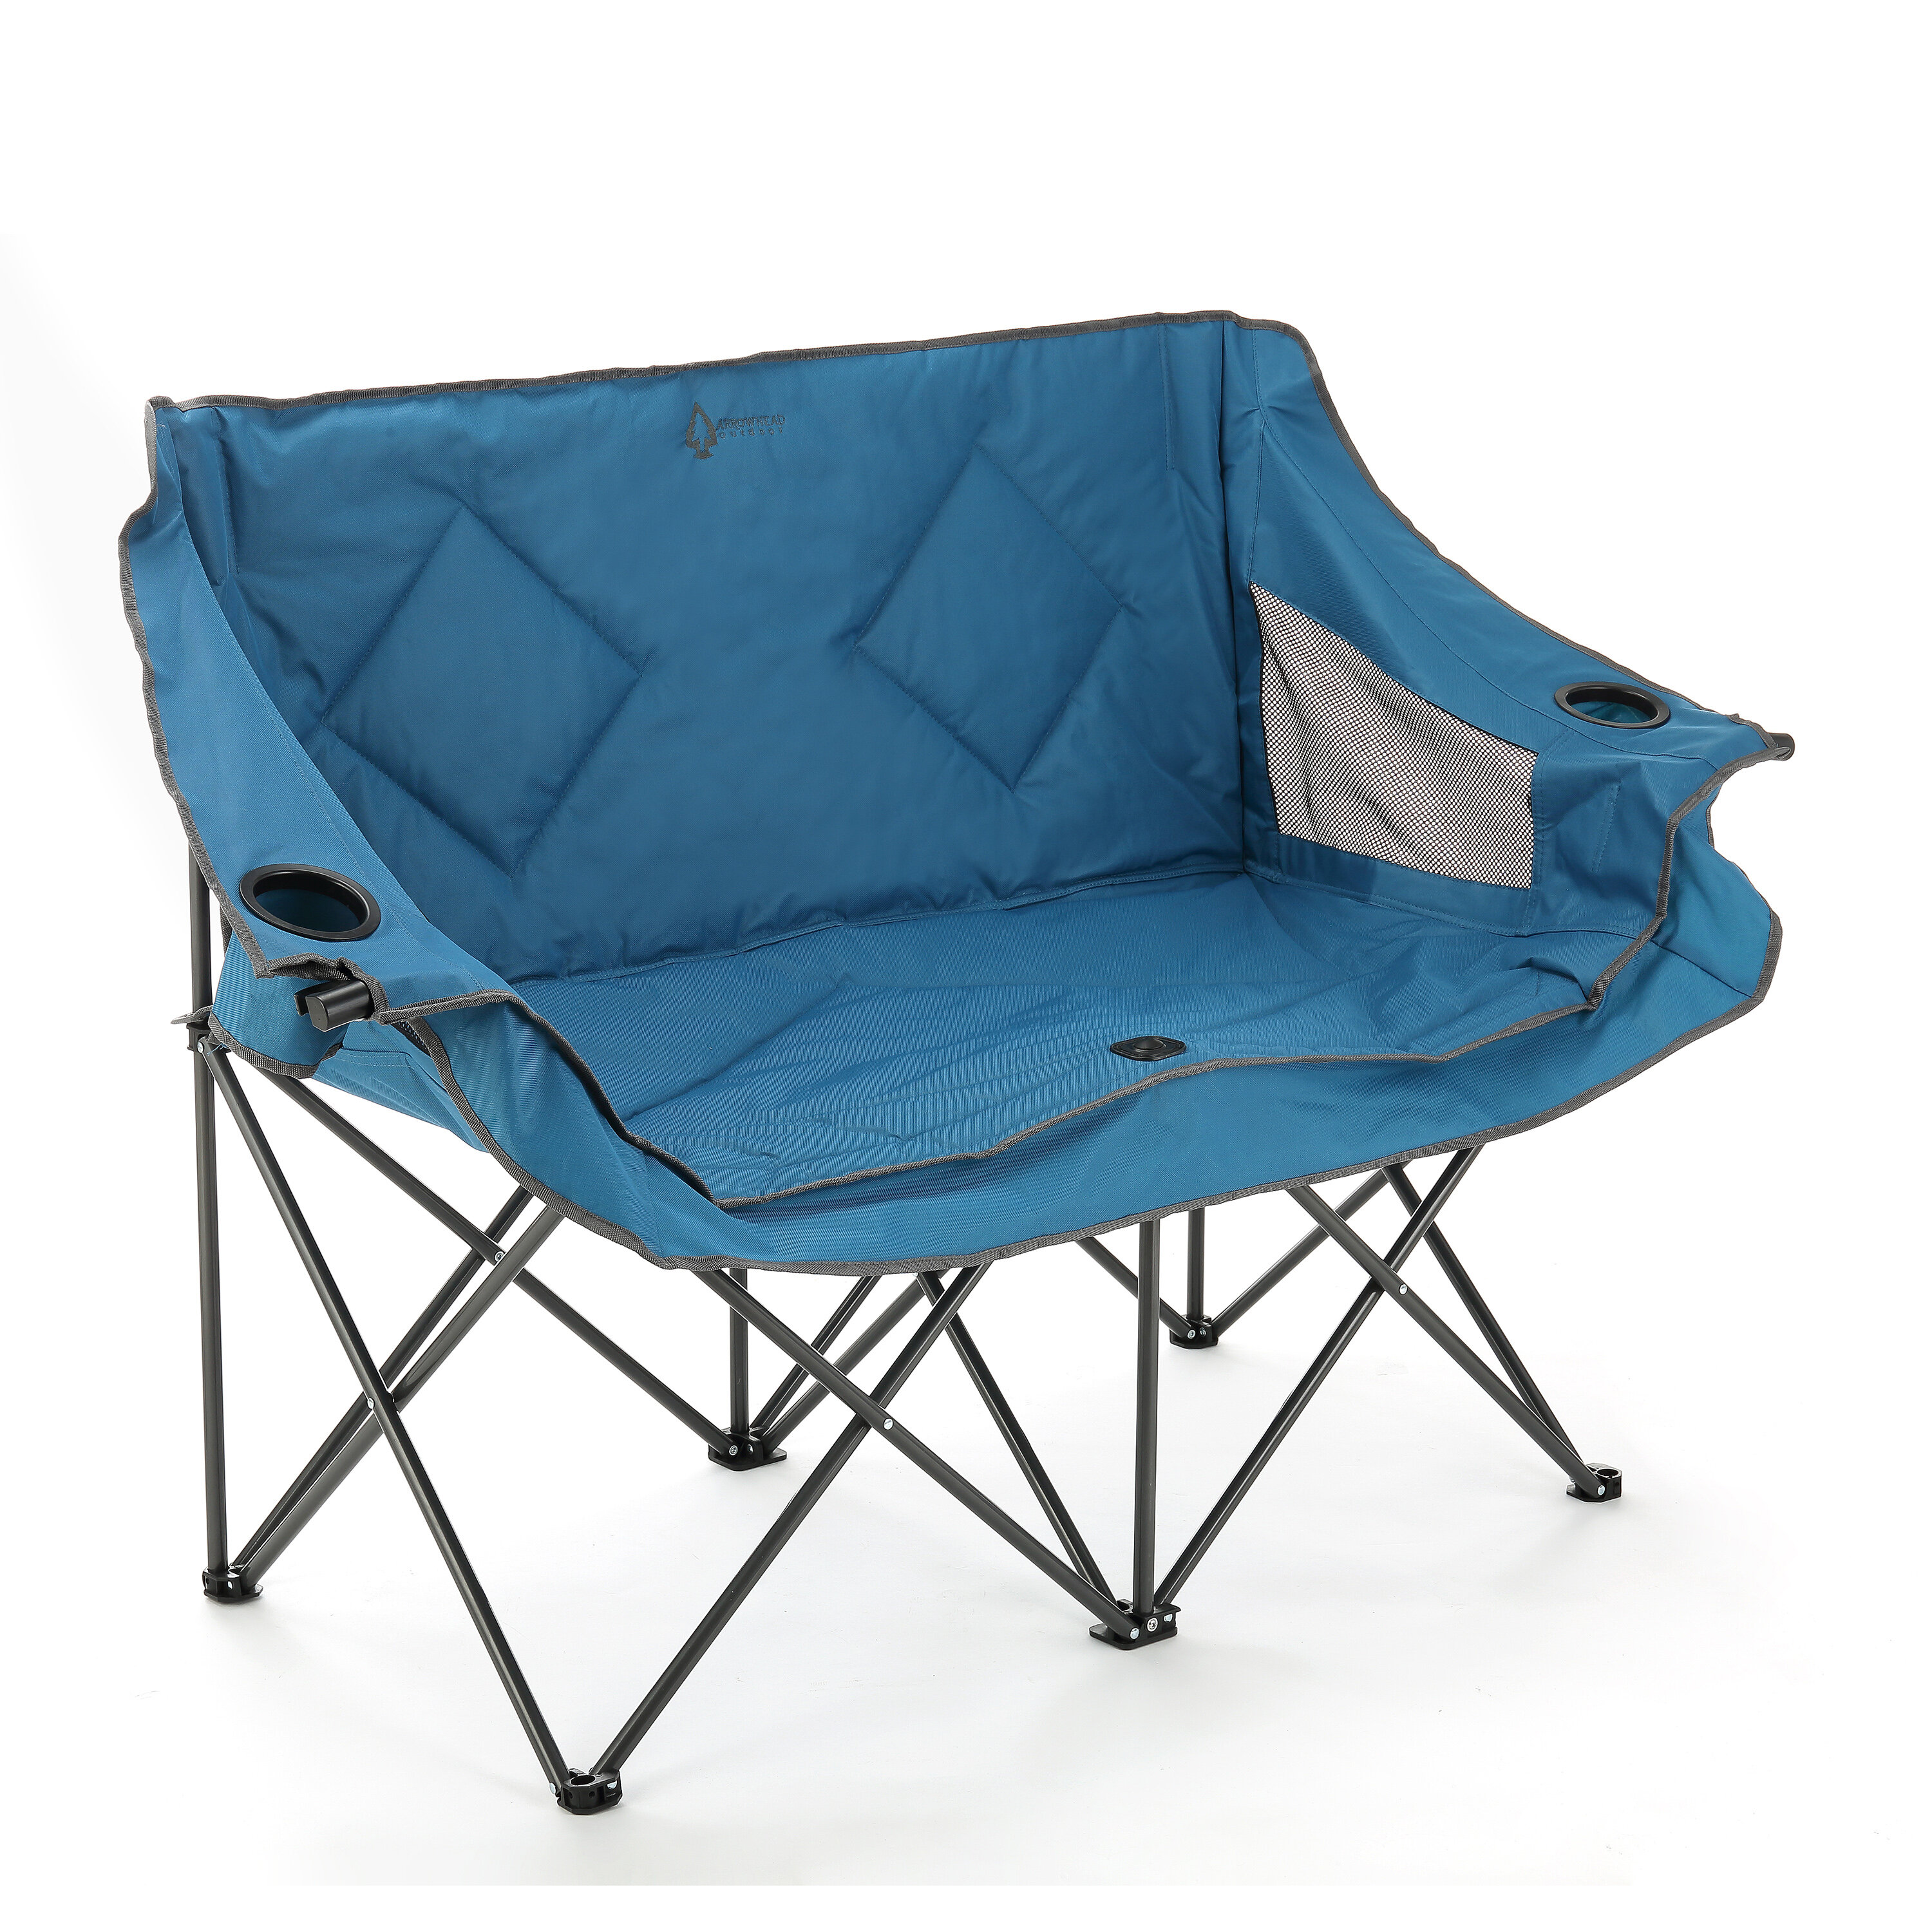 Backpack Beach Portable Folding Chair Blue Solid Construction Camping NW Quality 